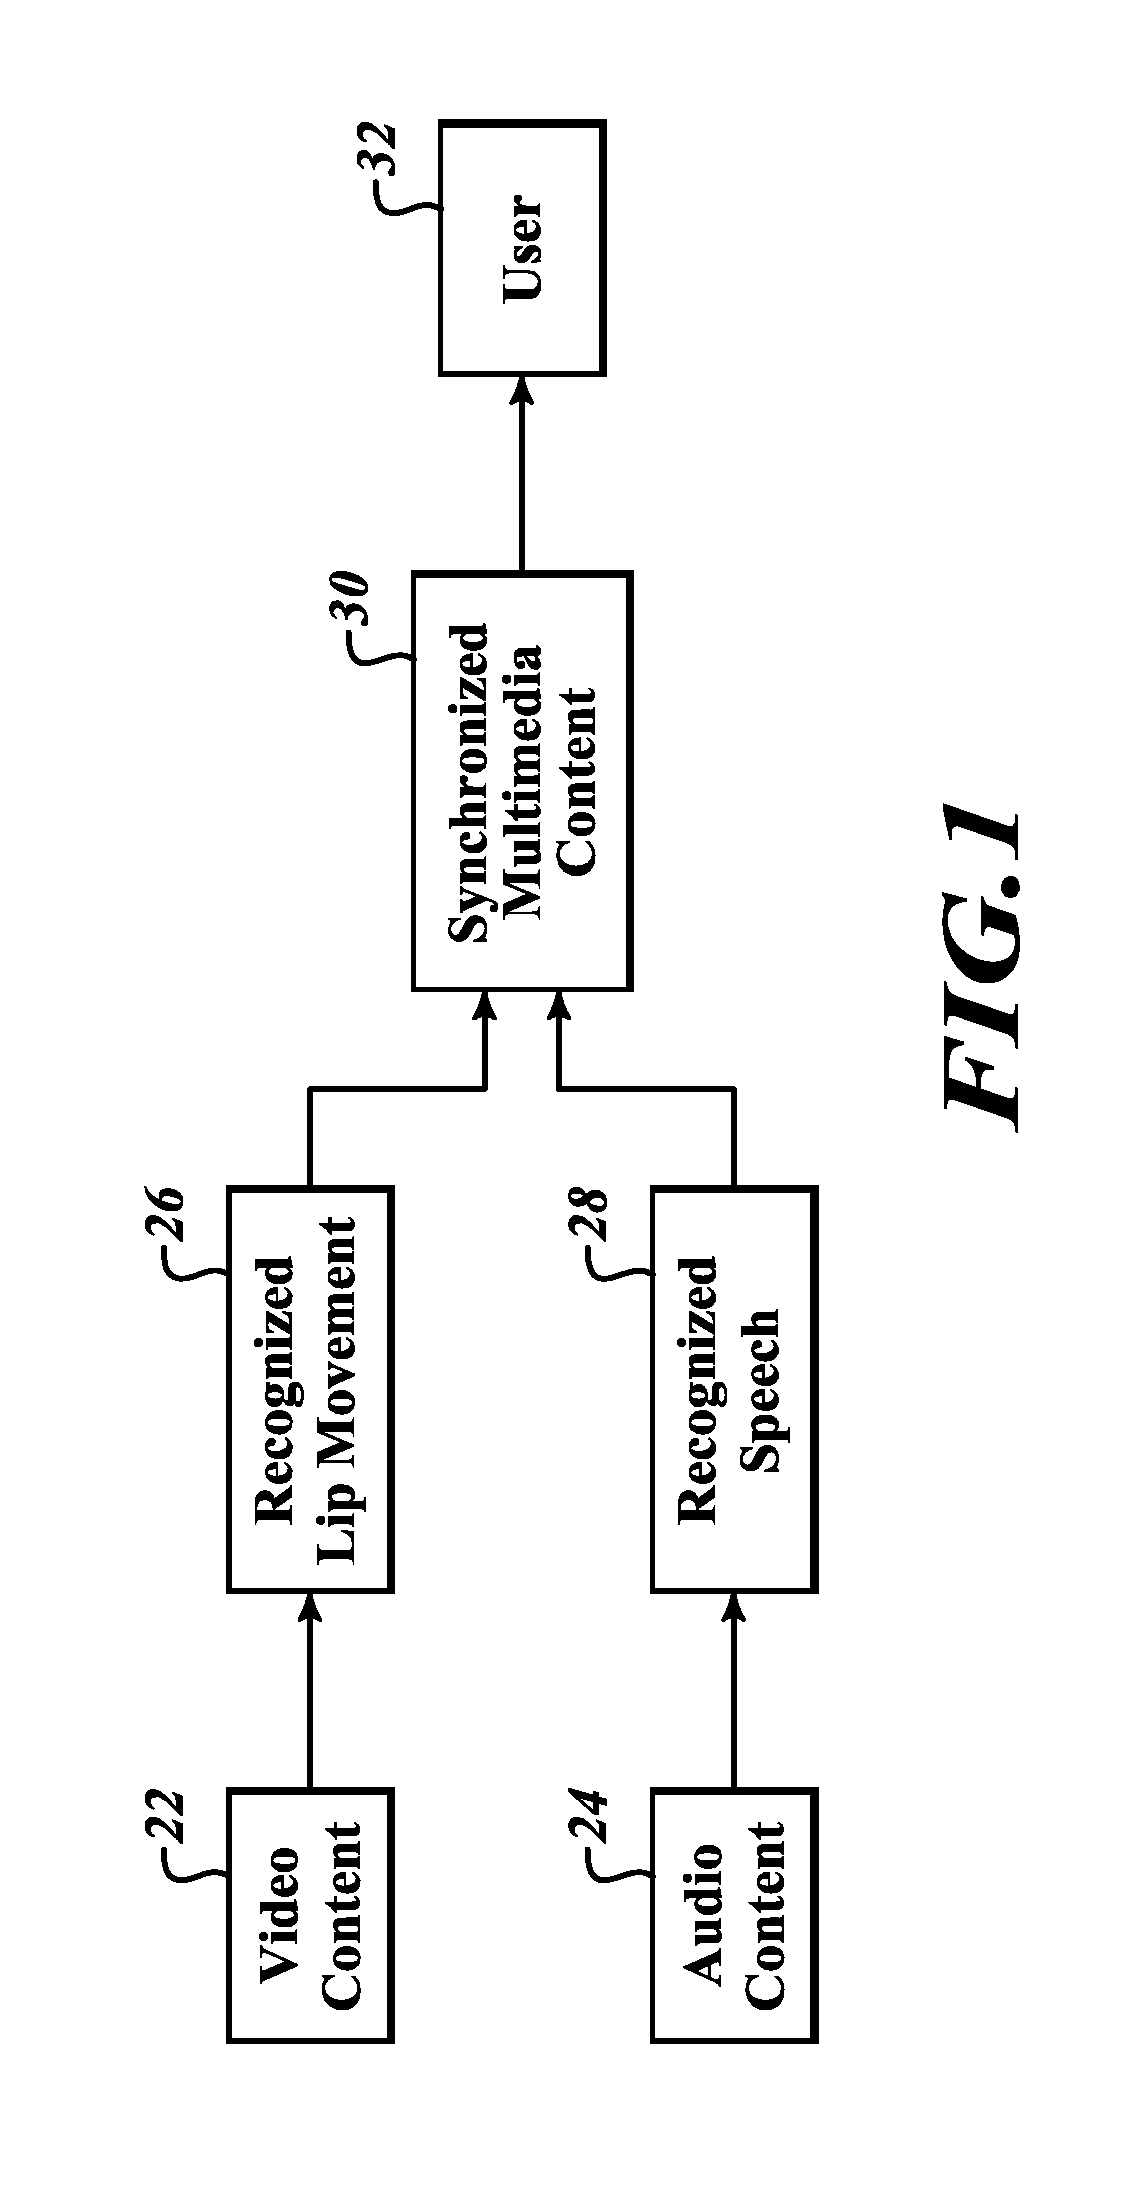 Video and audio processing based multimedia synchronization system and method of creating the same